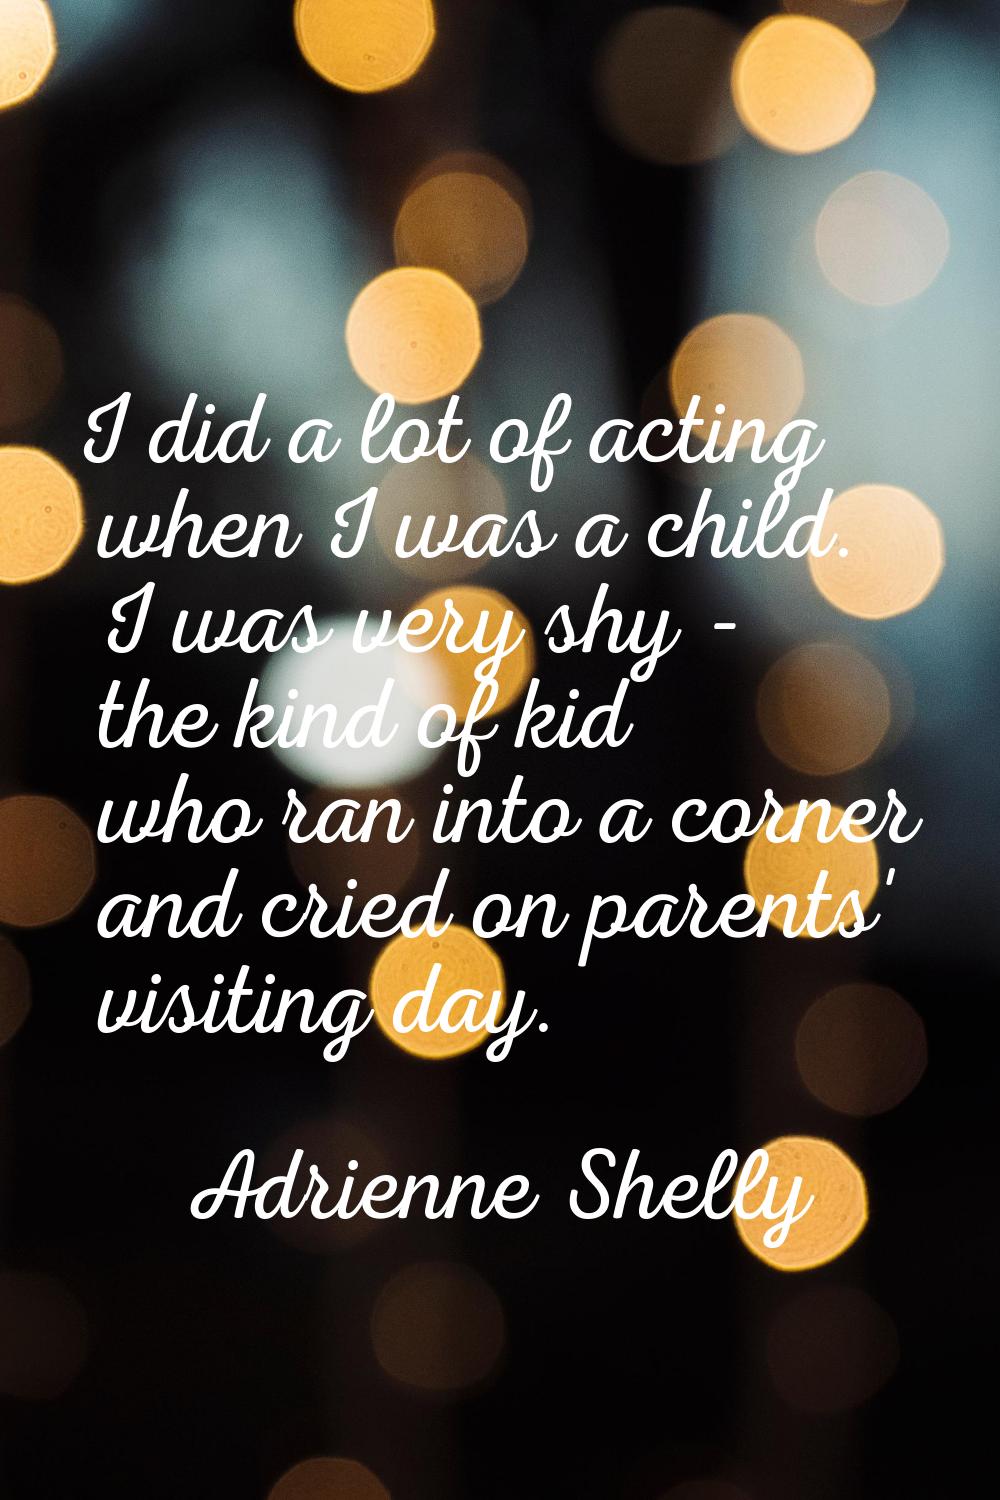 I did a lot of acting when I was a child. I was very shy - the kind of kid who ran into a corner an